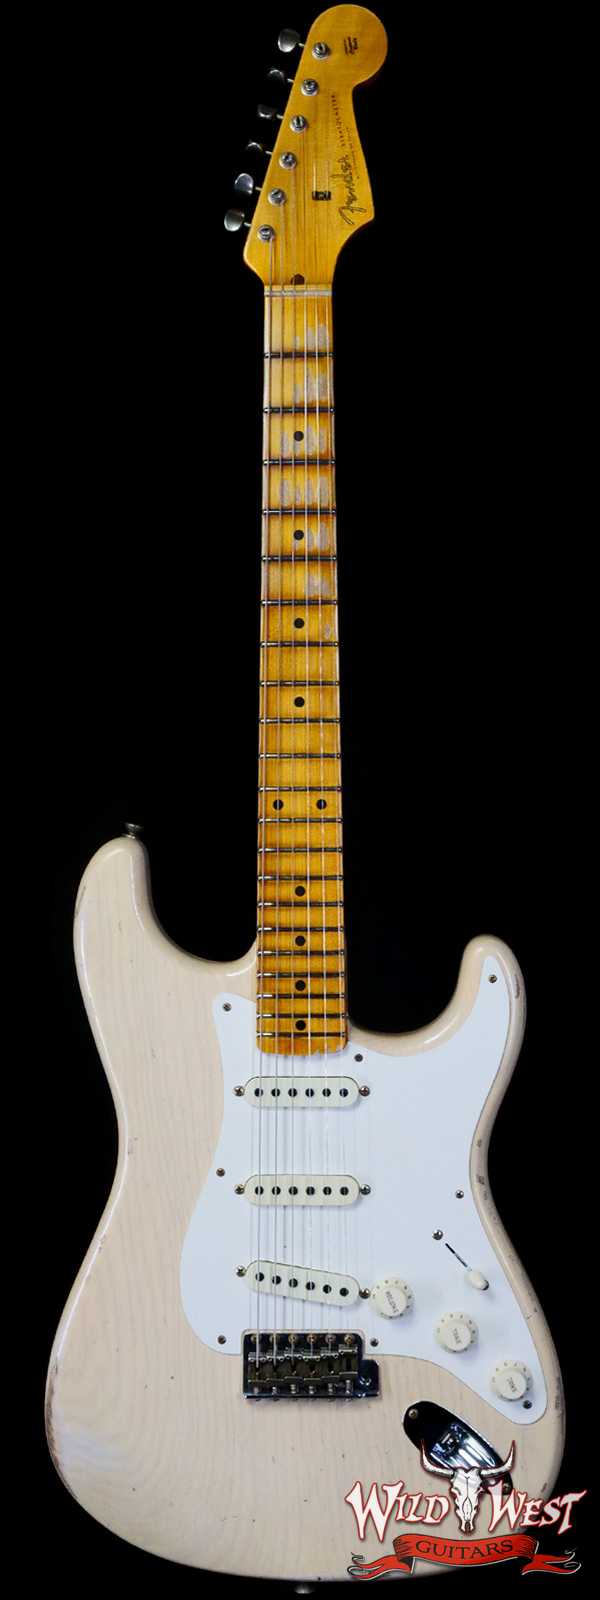 Fender Custom Shop 1957 Ash Stratocaster Hand-Wound Pickups Quatersawn Maple Neck Relic Aged White Blonde